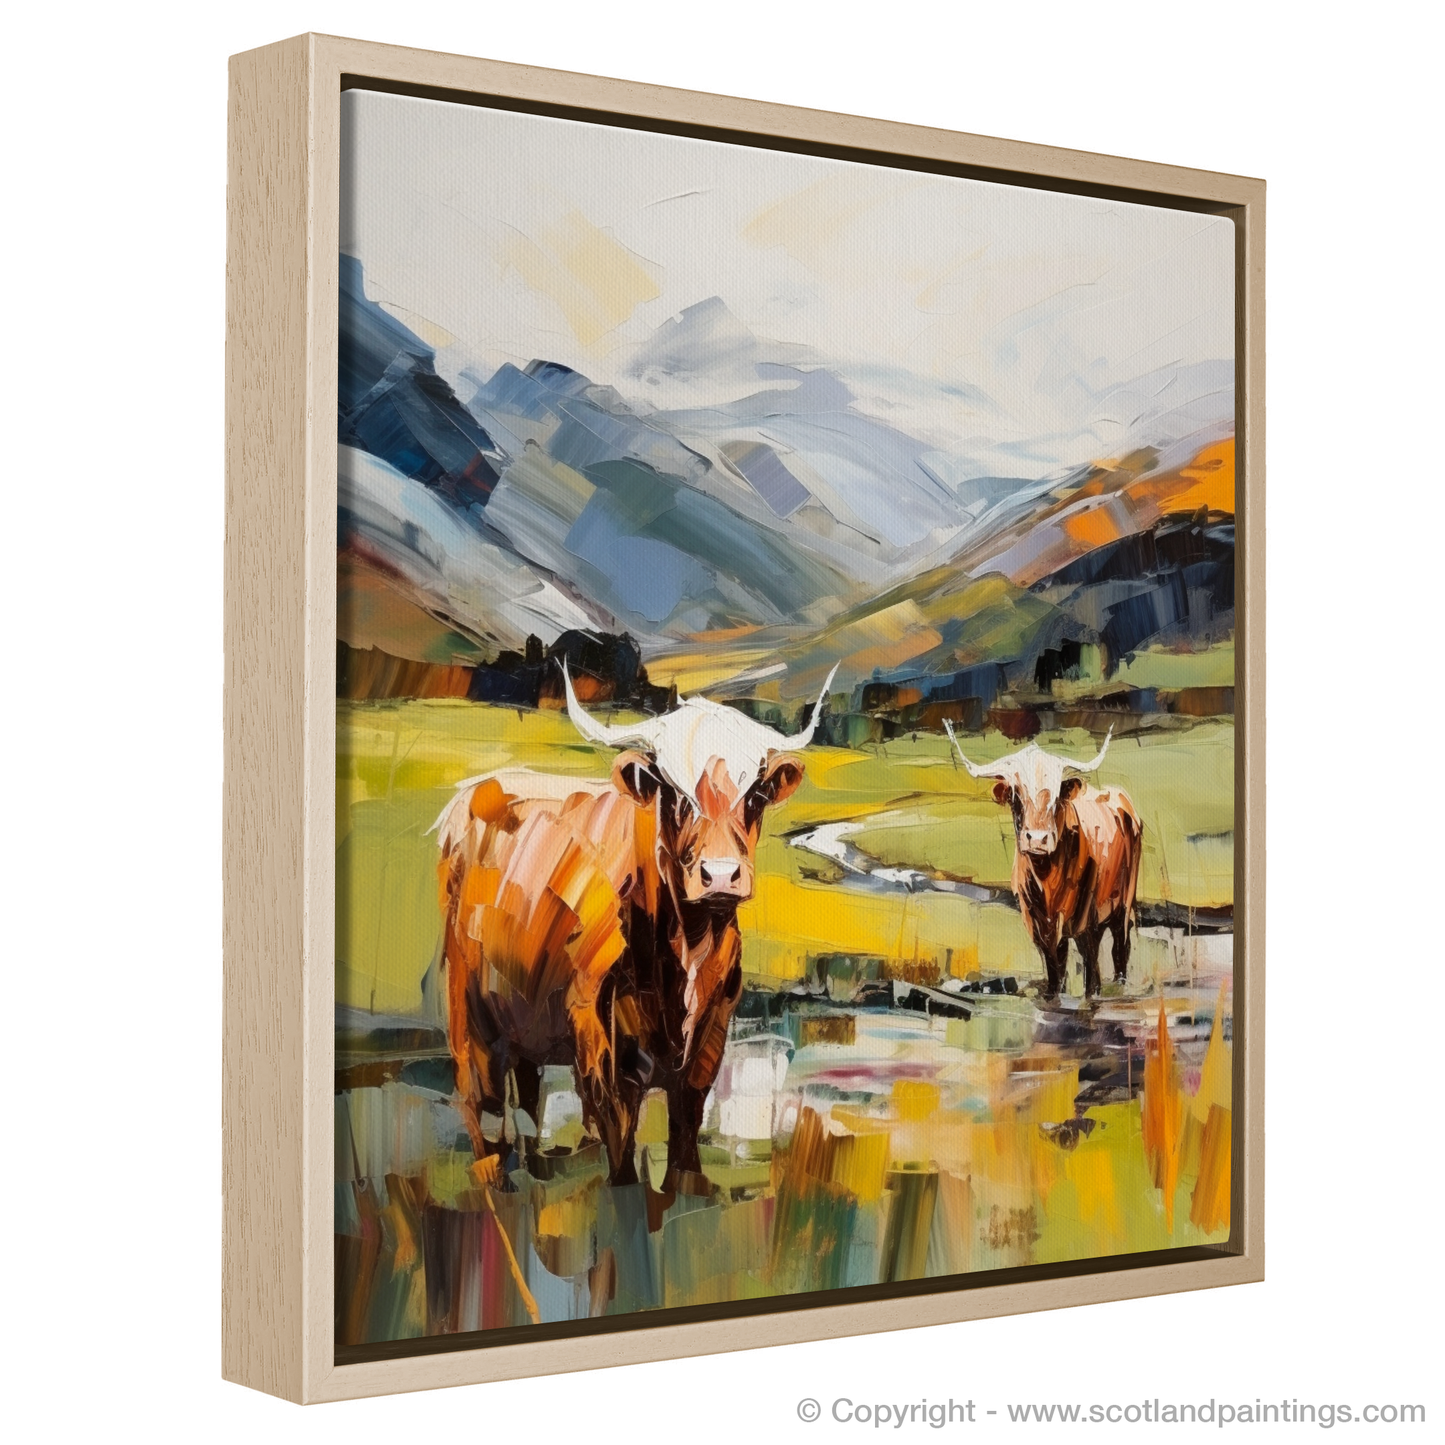 Painting and Art Print of Highland cows in Glencoe entitled "Majestic Highland Cows of Glencoe: An Expressionist Ode to Scotland's Wild Beauty".